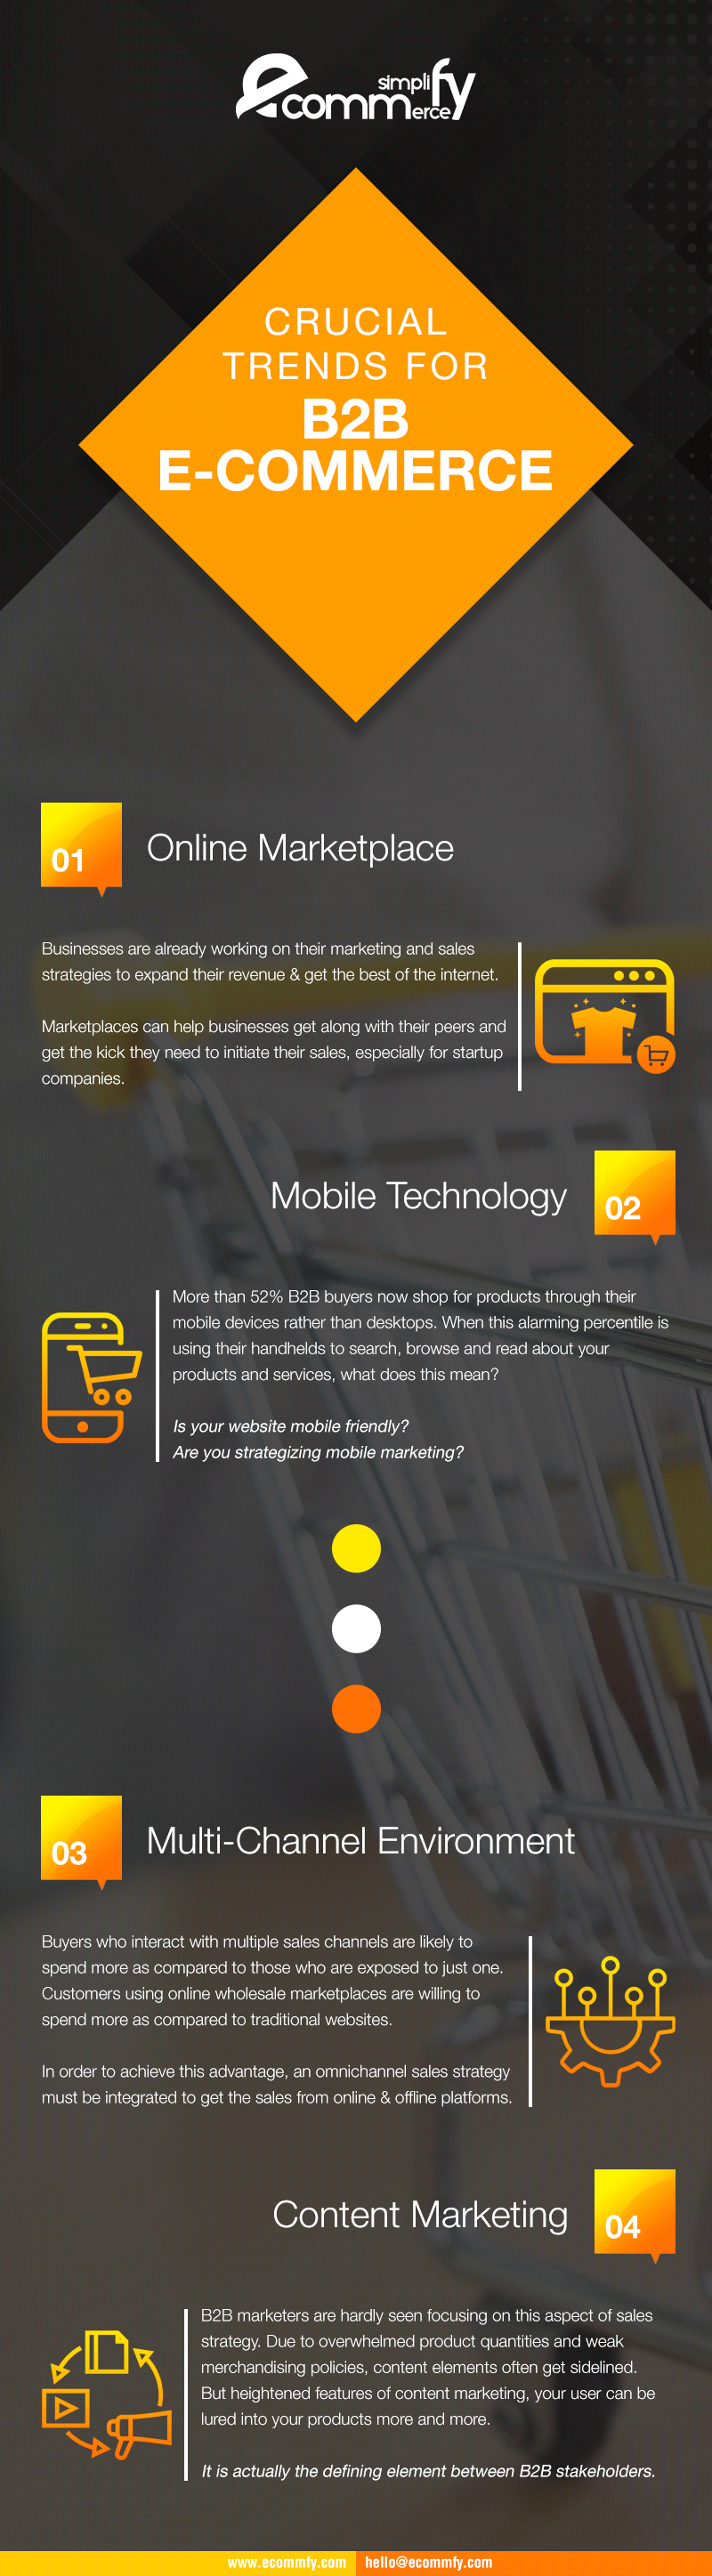 Crucial-Trends-for-B2B-eCommerce-Infographic-eCommfy-eCommerce-Simplified